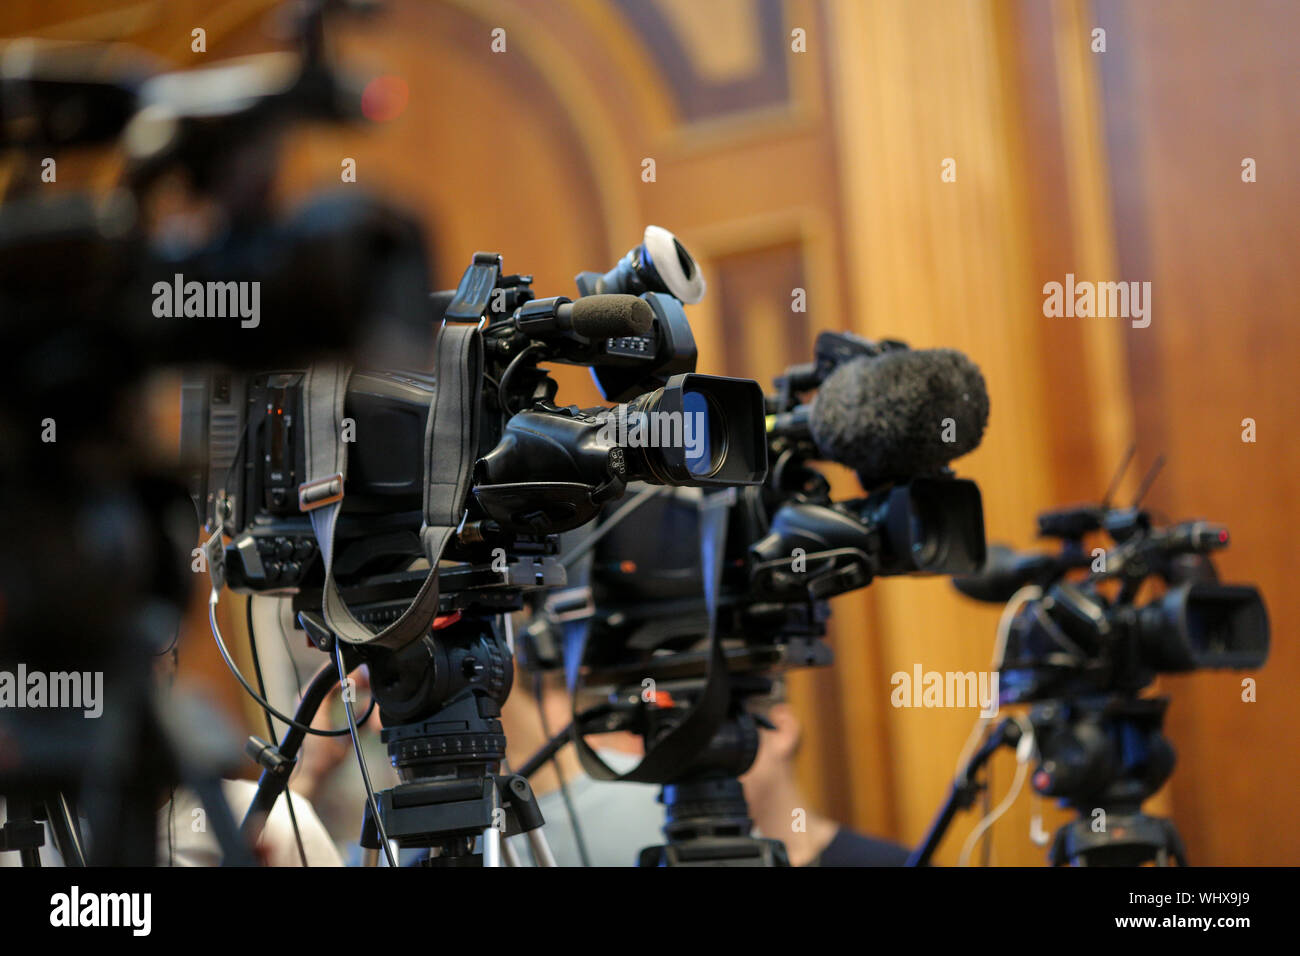 Details with television video cameras and recording equipment during a press event Stock Photo